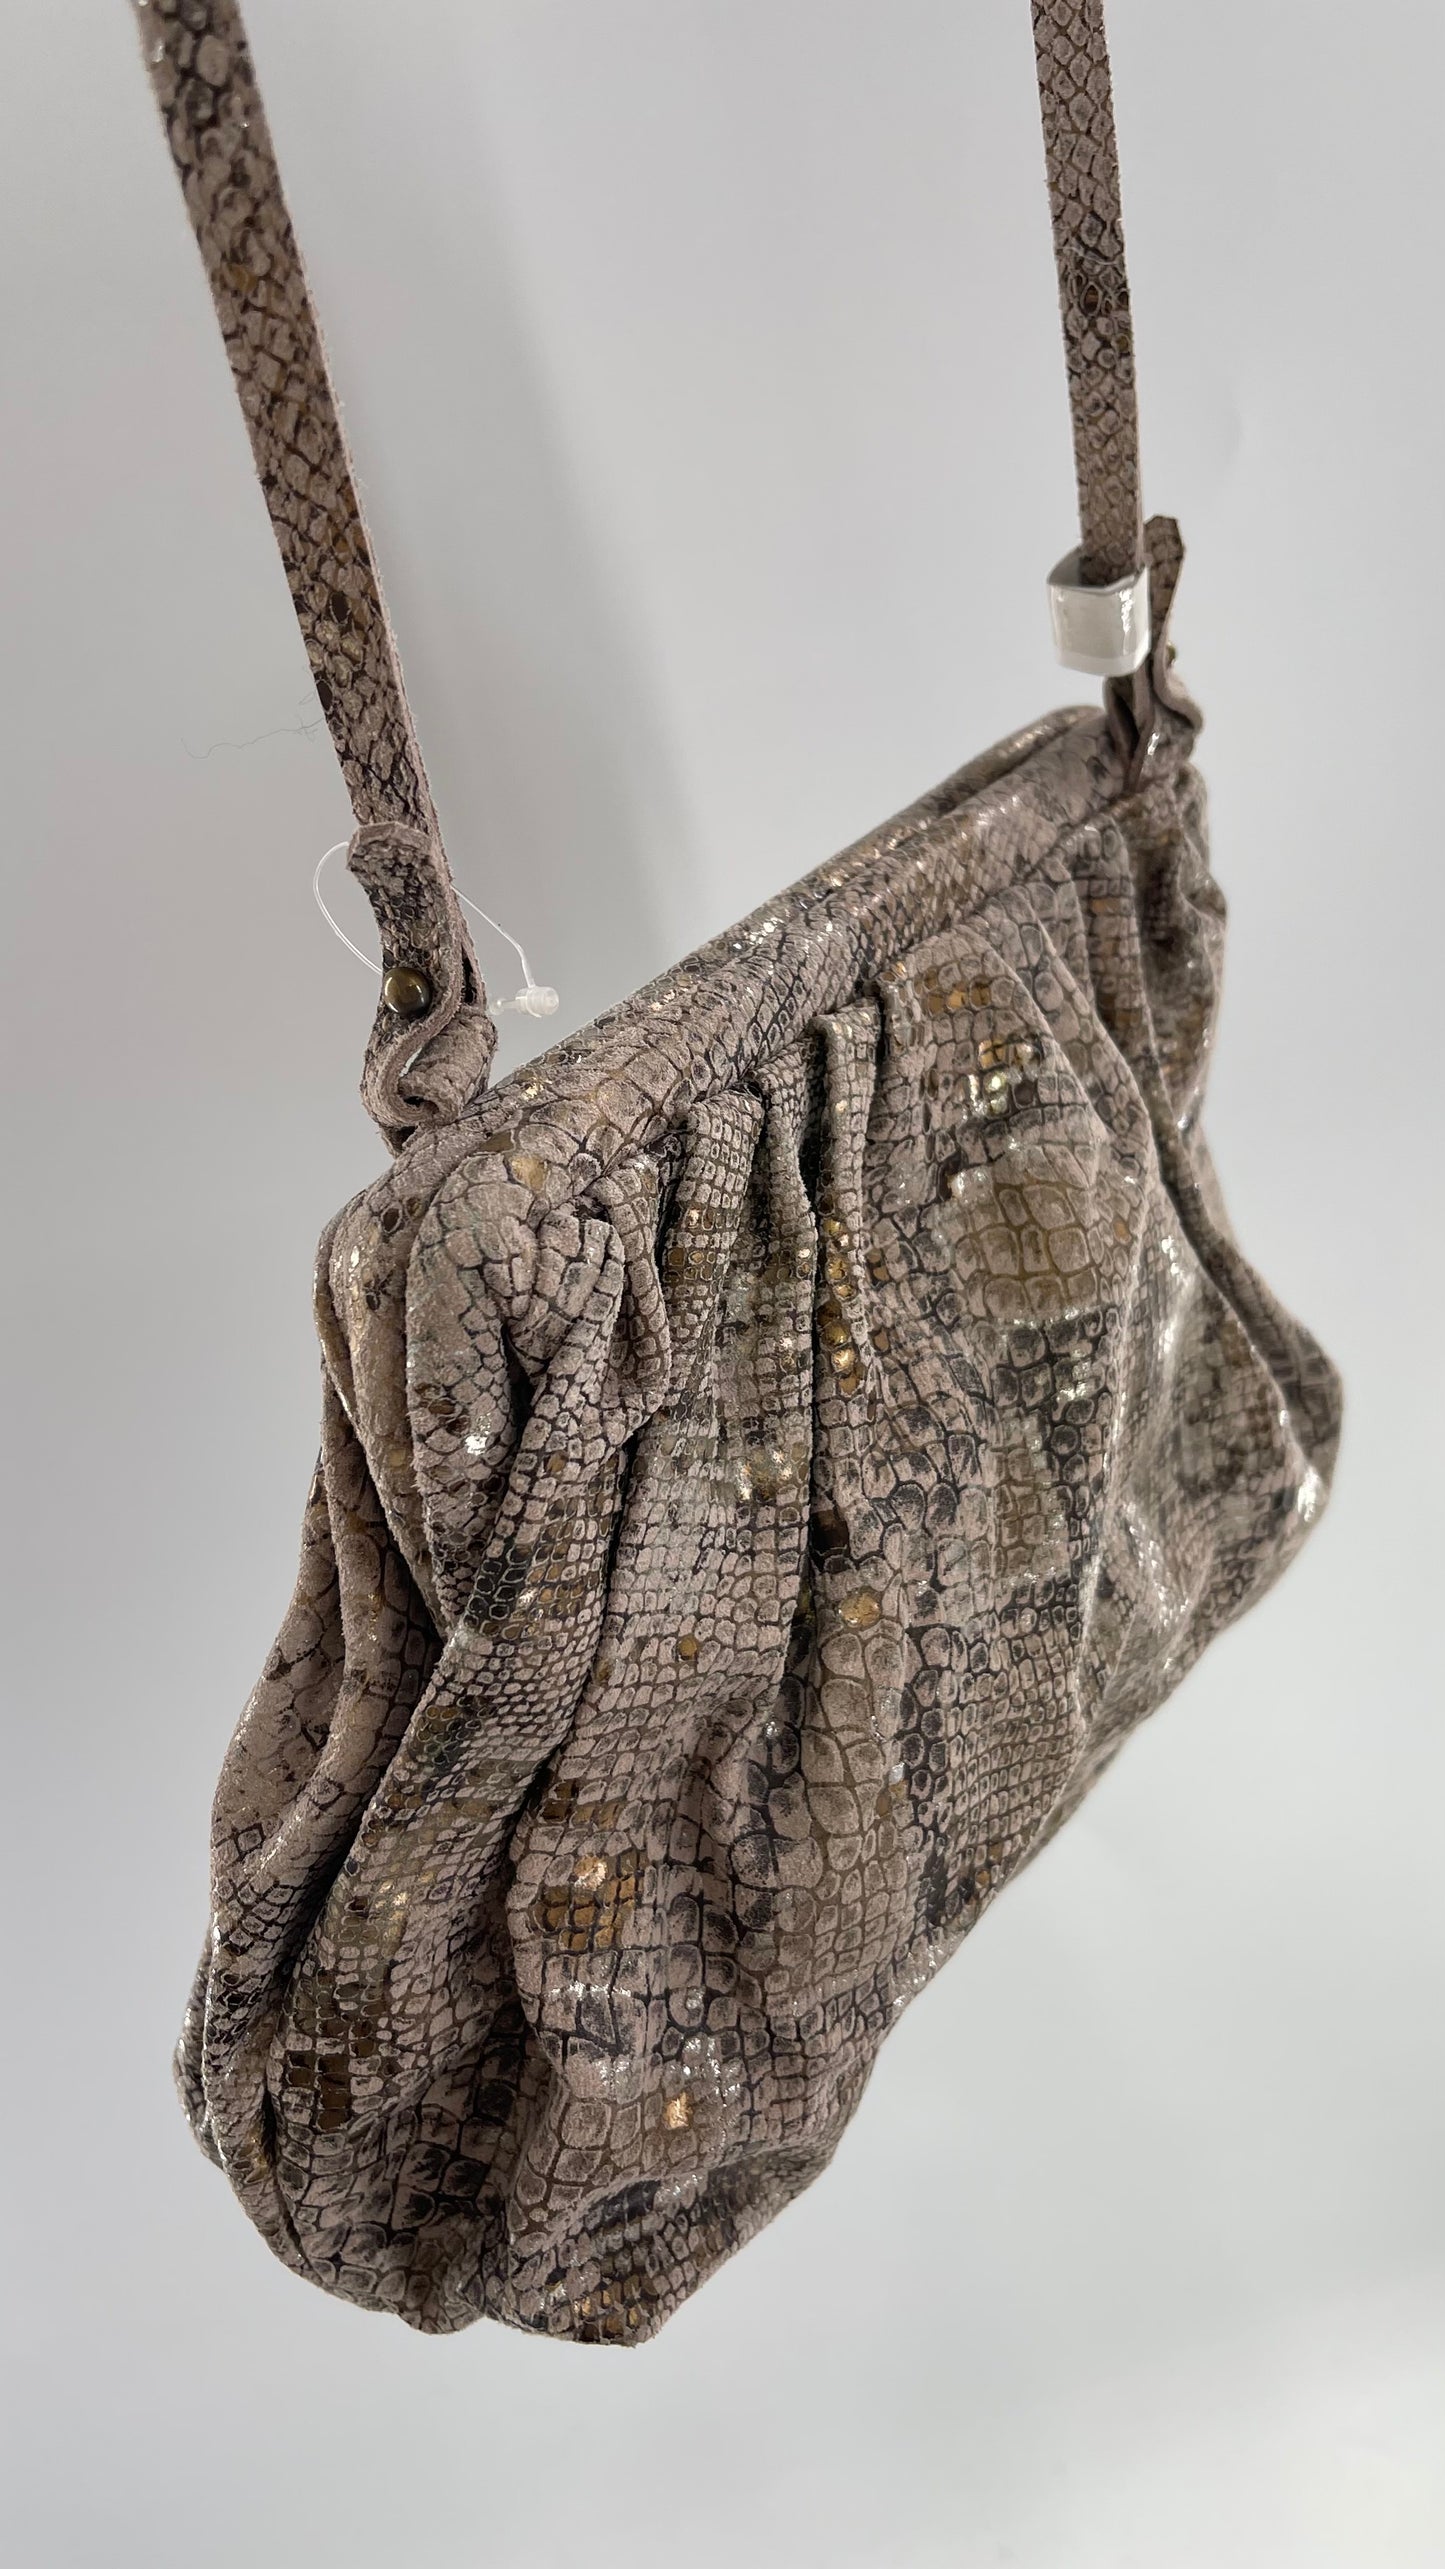 Free People Genuine Leather Clutch and Shoulder Bag Snake Print with Reflective Silver and Gold Flecks